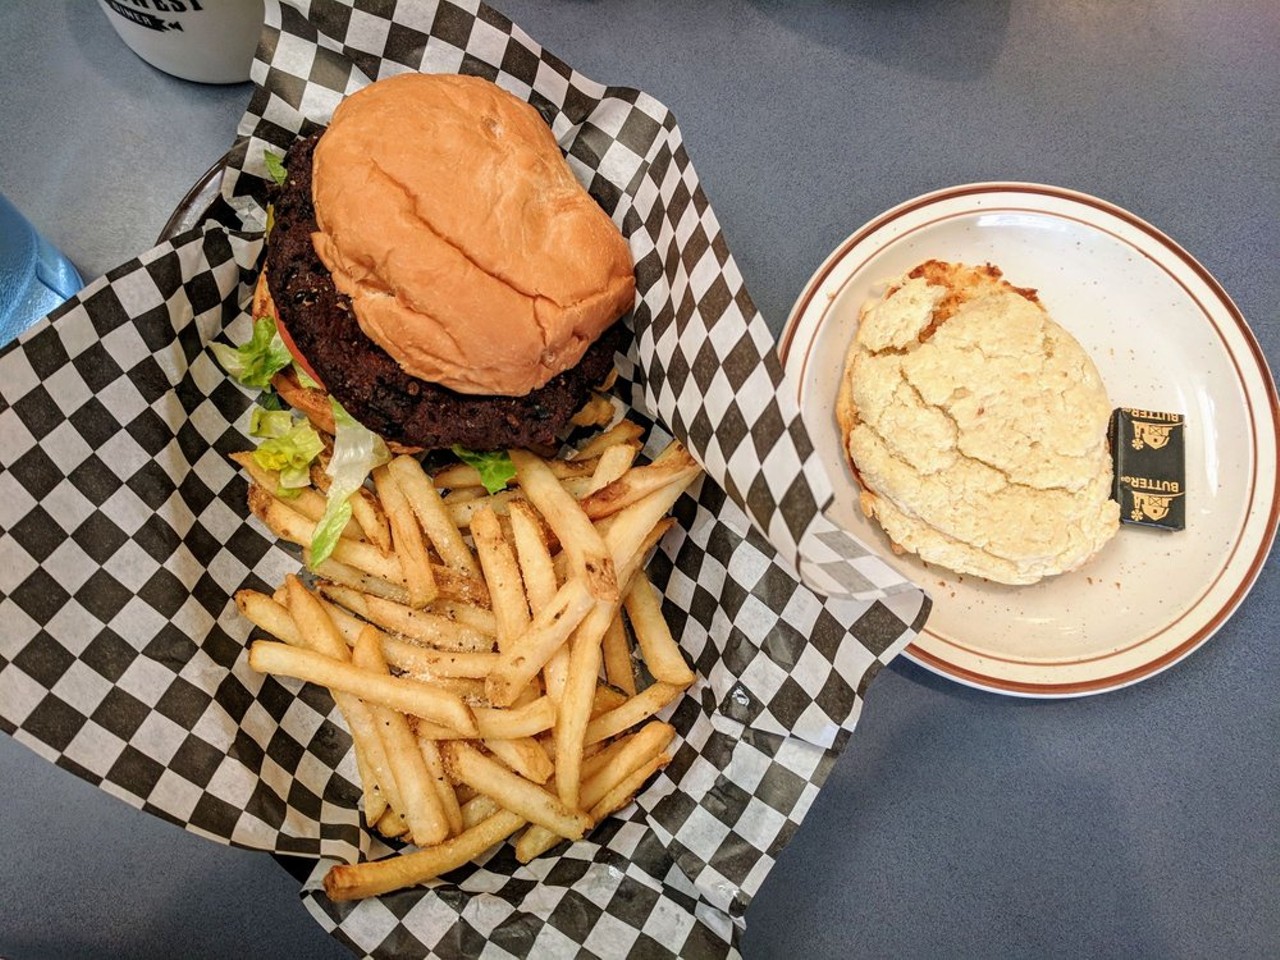 #29: Southwest Diner
(6803 Southwest Avenue; 314-260-7244)
Southwest Diner scored an almost-perfect four-and-a-half stars. Read what Yelpers thought here.
Photo credit: Jason P. via Yelp